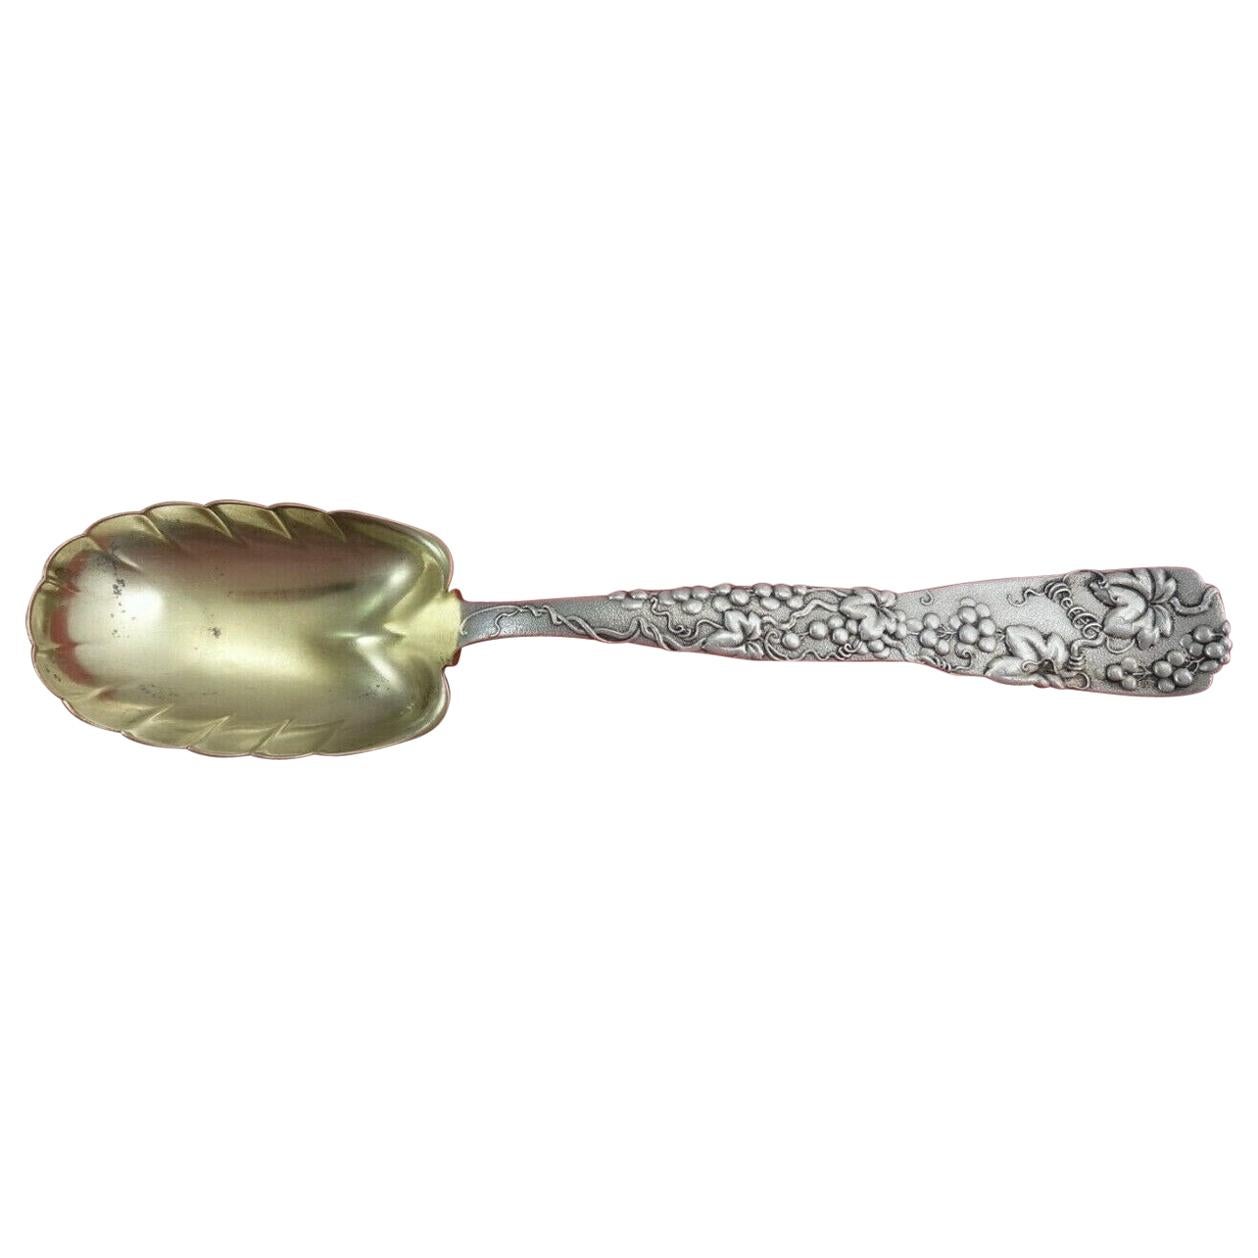 Vine by Tiffany and Co Sterling Silver Berry Spoon GW Leaf Shape with Grapes